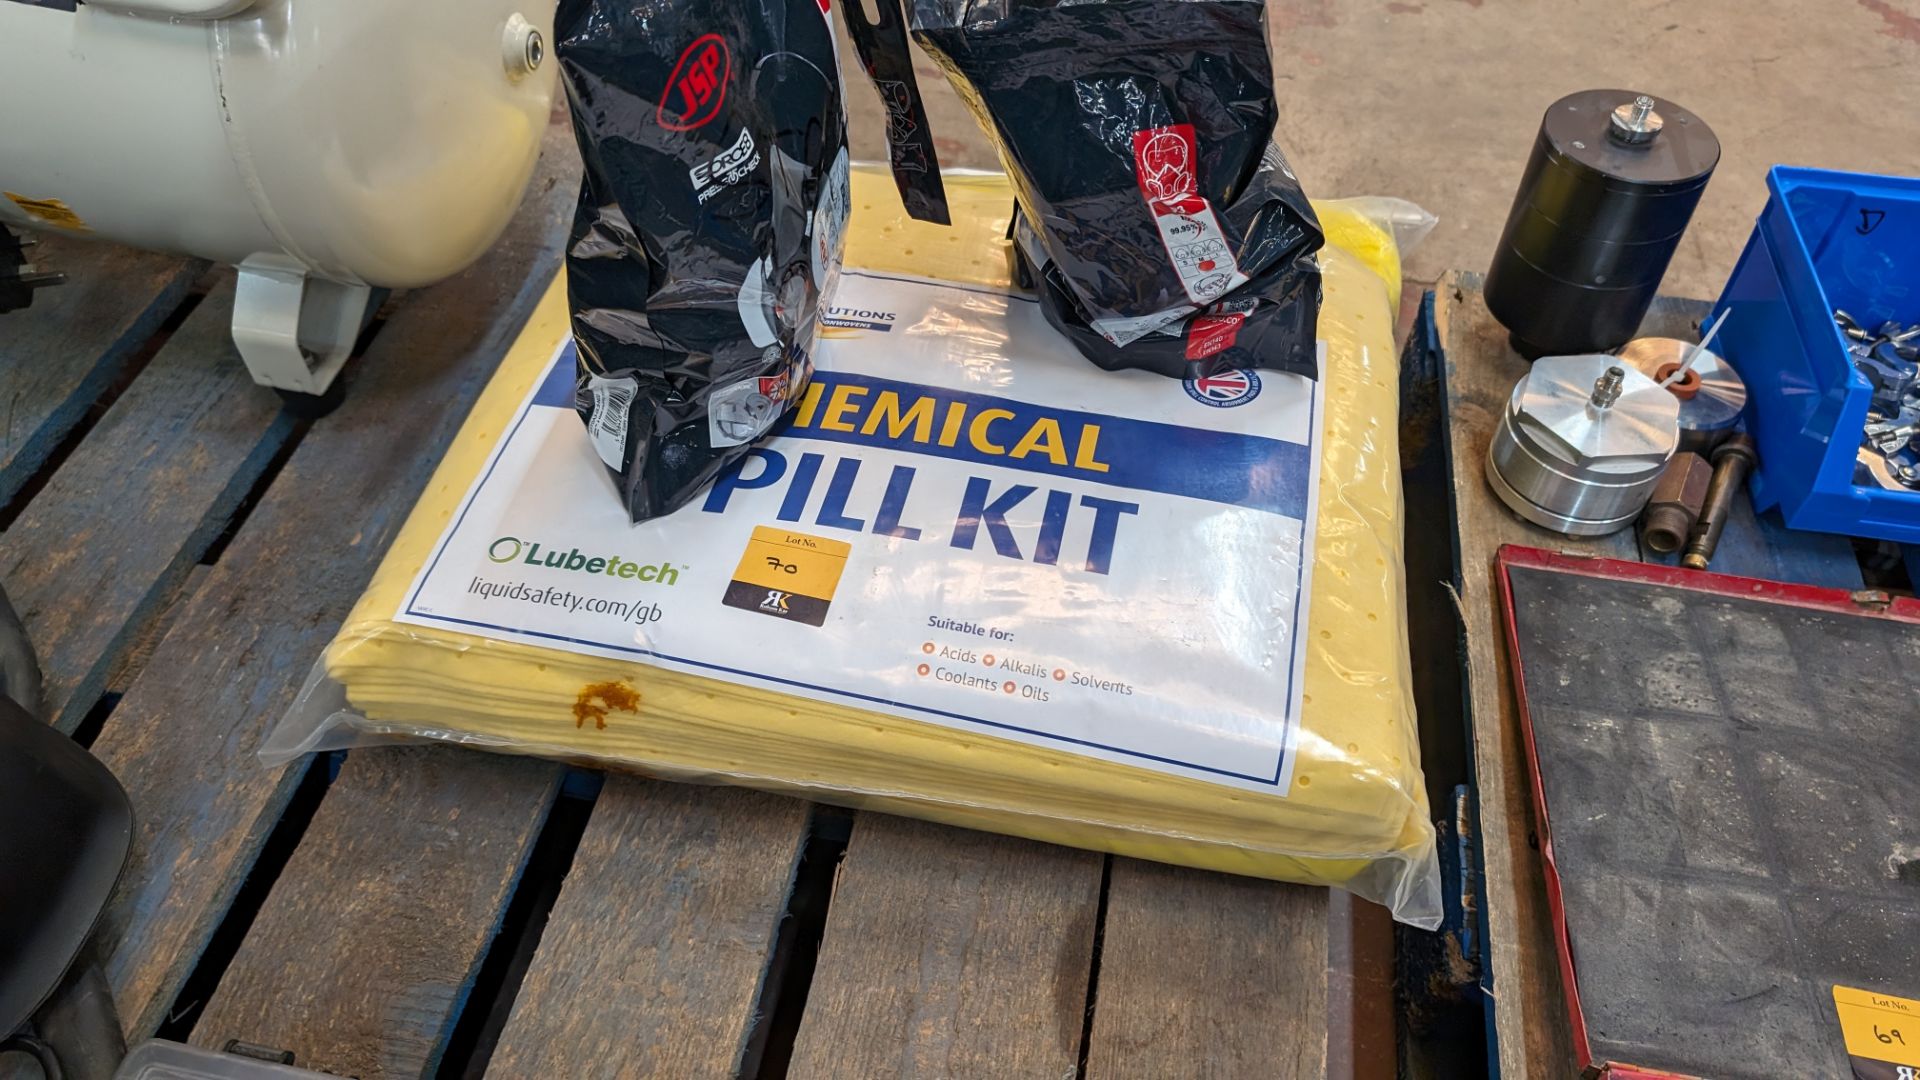 Chemical spill kit plus 2 off respirator devices - Image 3 of 8